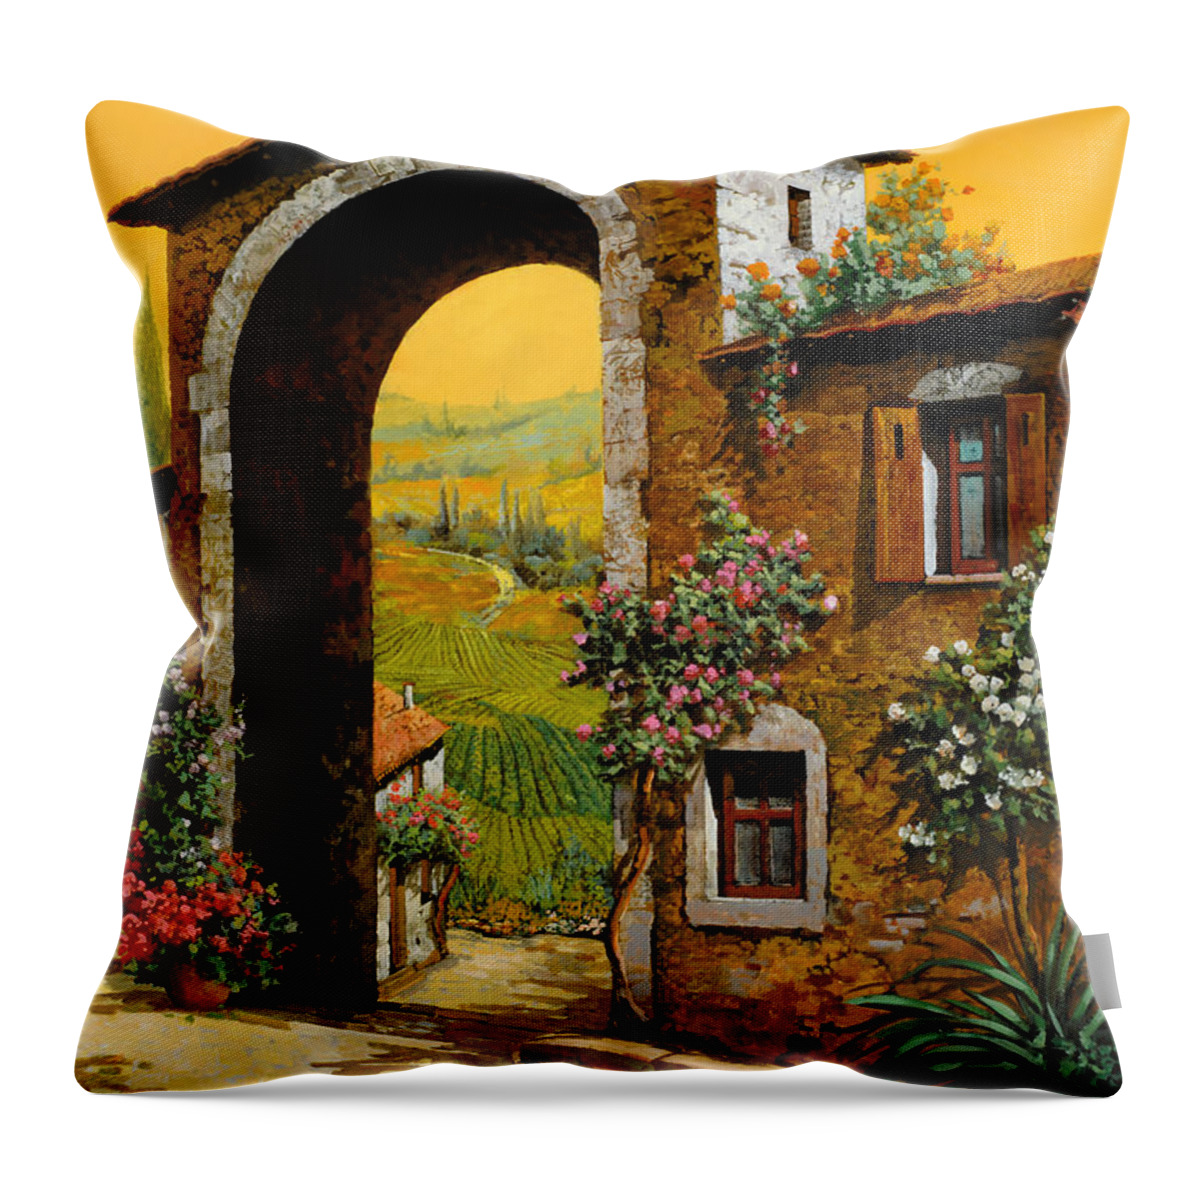 Arch Throw Pillow featuring the painting Arco Di Paese by Guido Borelli